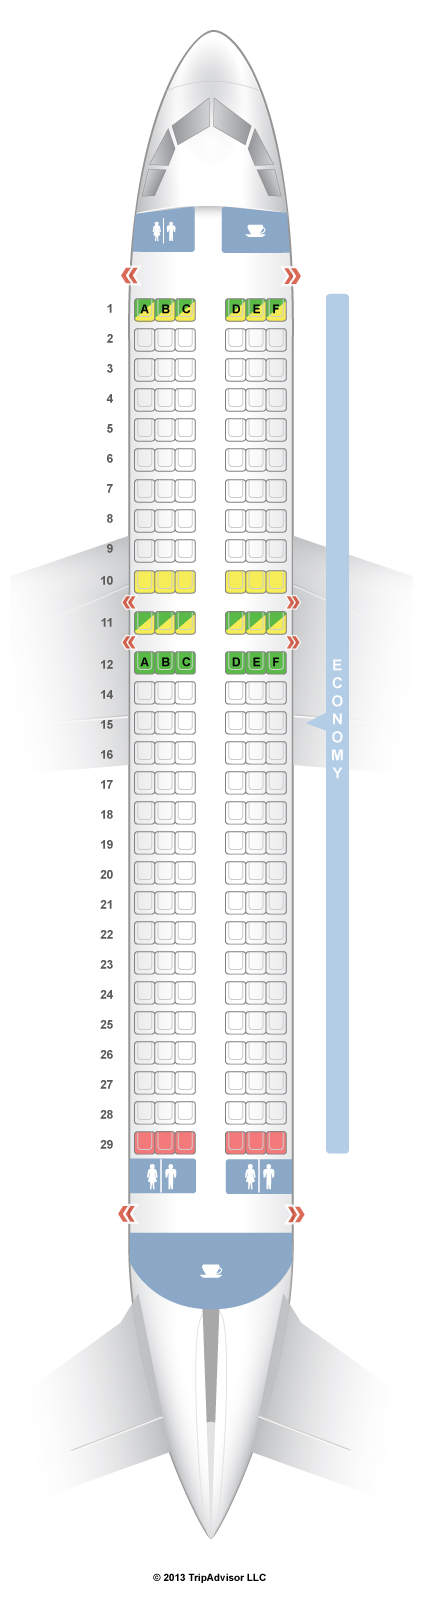 Airbus A320 100 Seating Chart